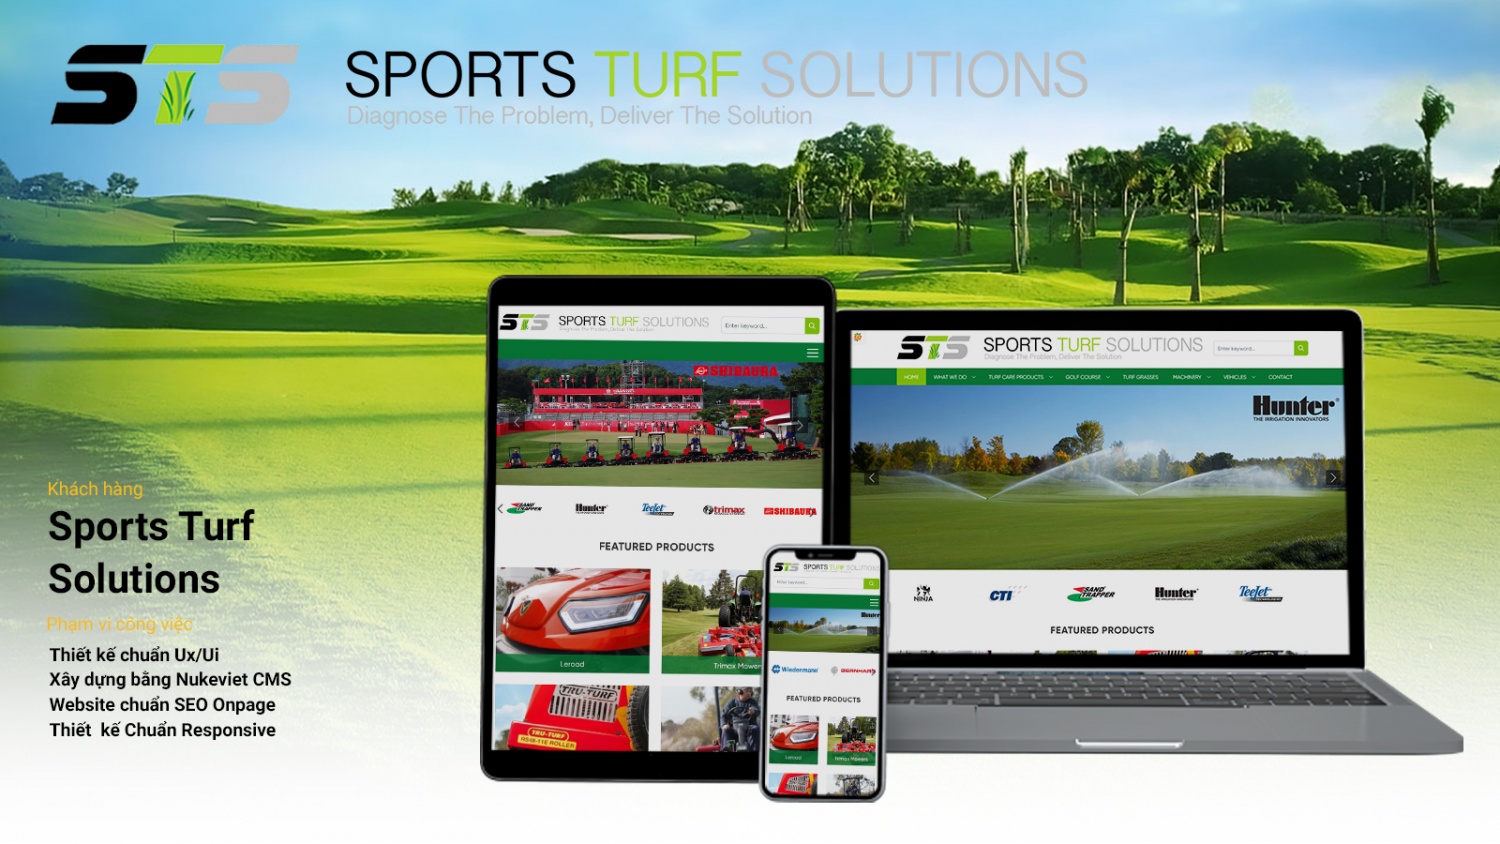 Sports Turf Solutions